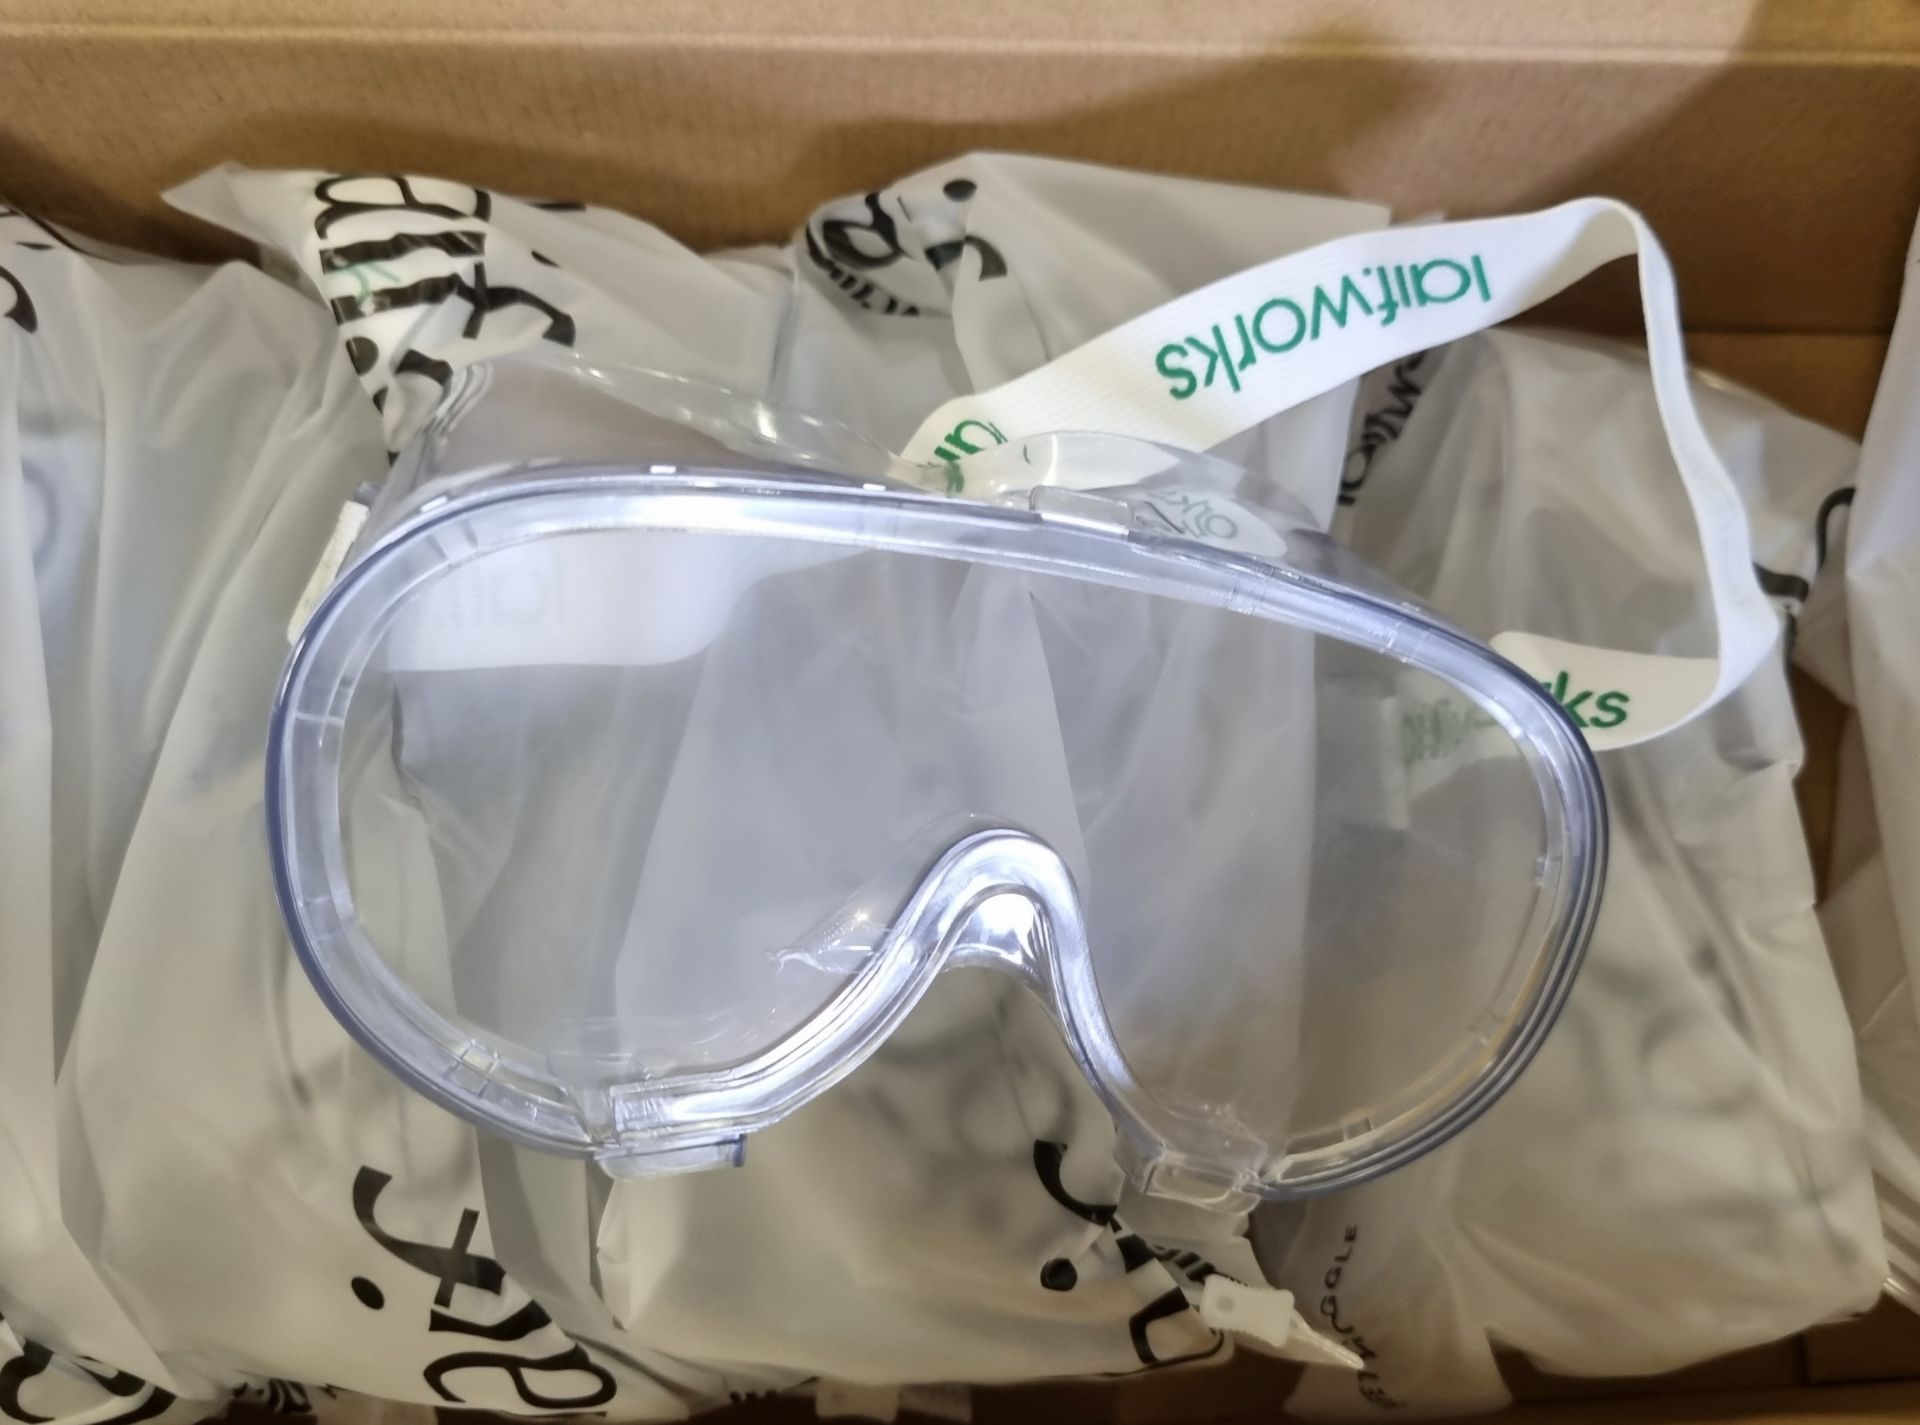 2x boxes of Laif.works clear eye protection safety goggles with adjustable strap - Image 3 of 4